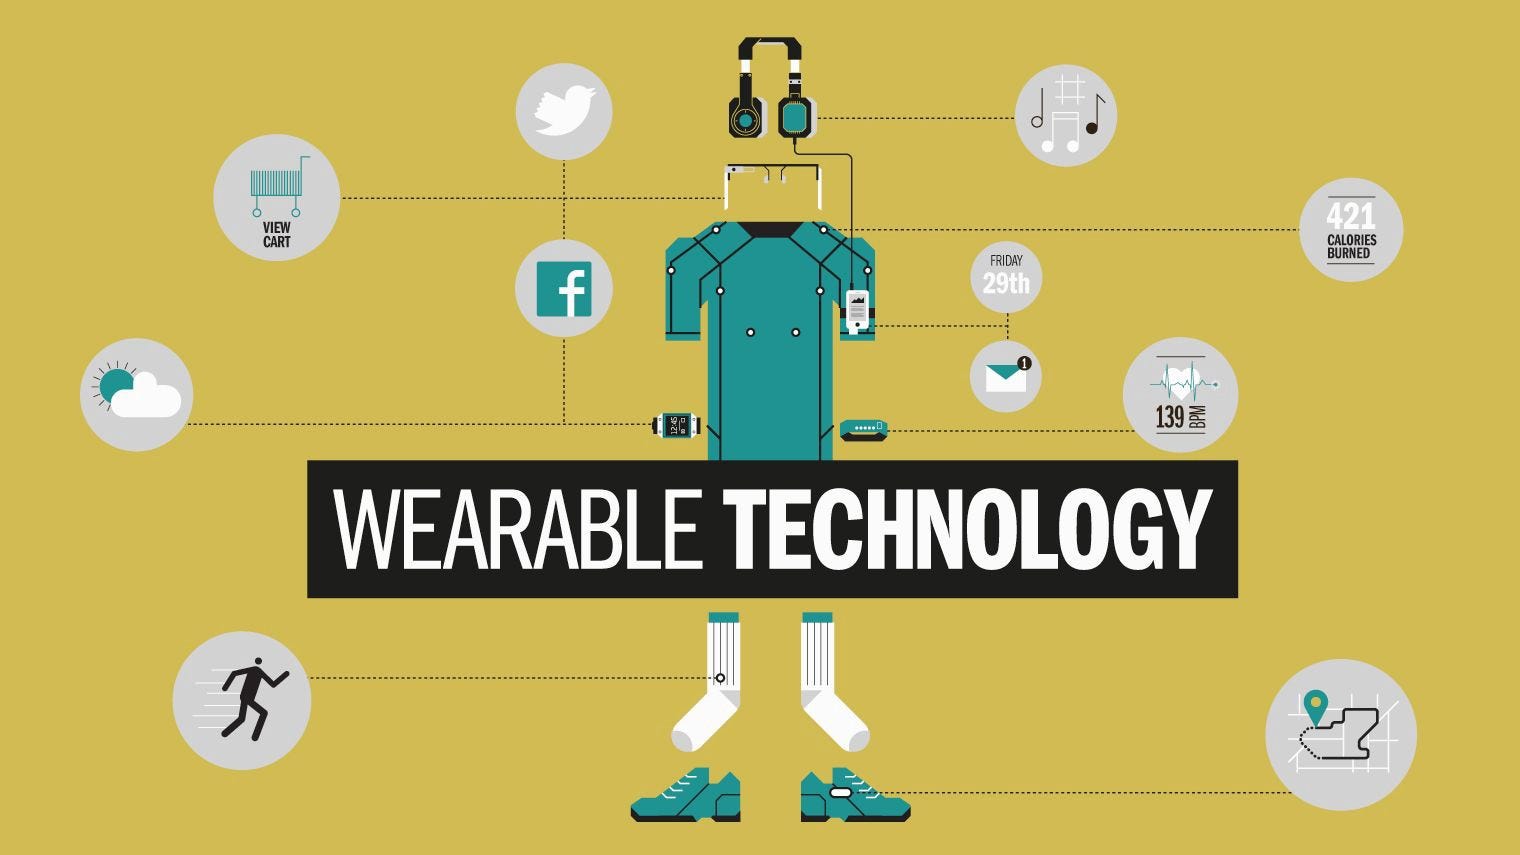 How Wearable Technology Can Improve Our Health And Daily Activities 1